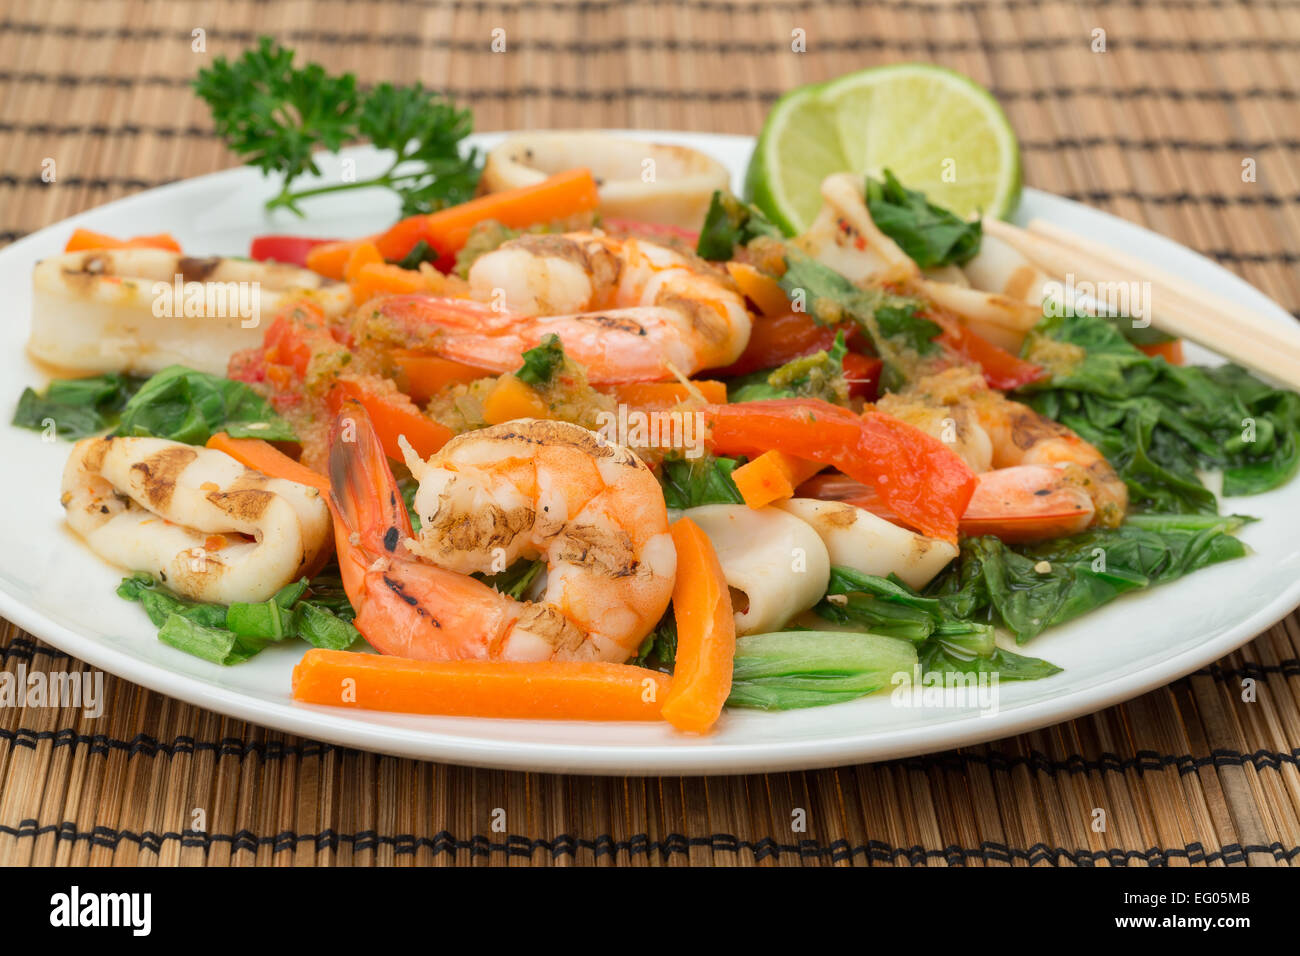 Vietnamese cuisine - plate of chargrilled Calamari and King Prawns with strips of carrot, red bell peppers, and pak choi Stock Photo